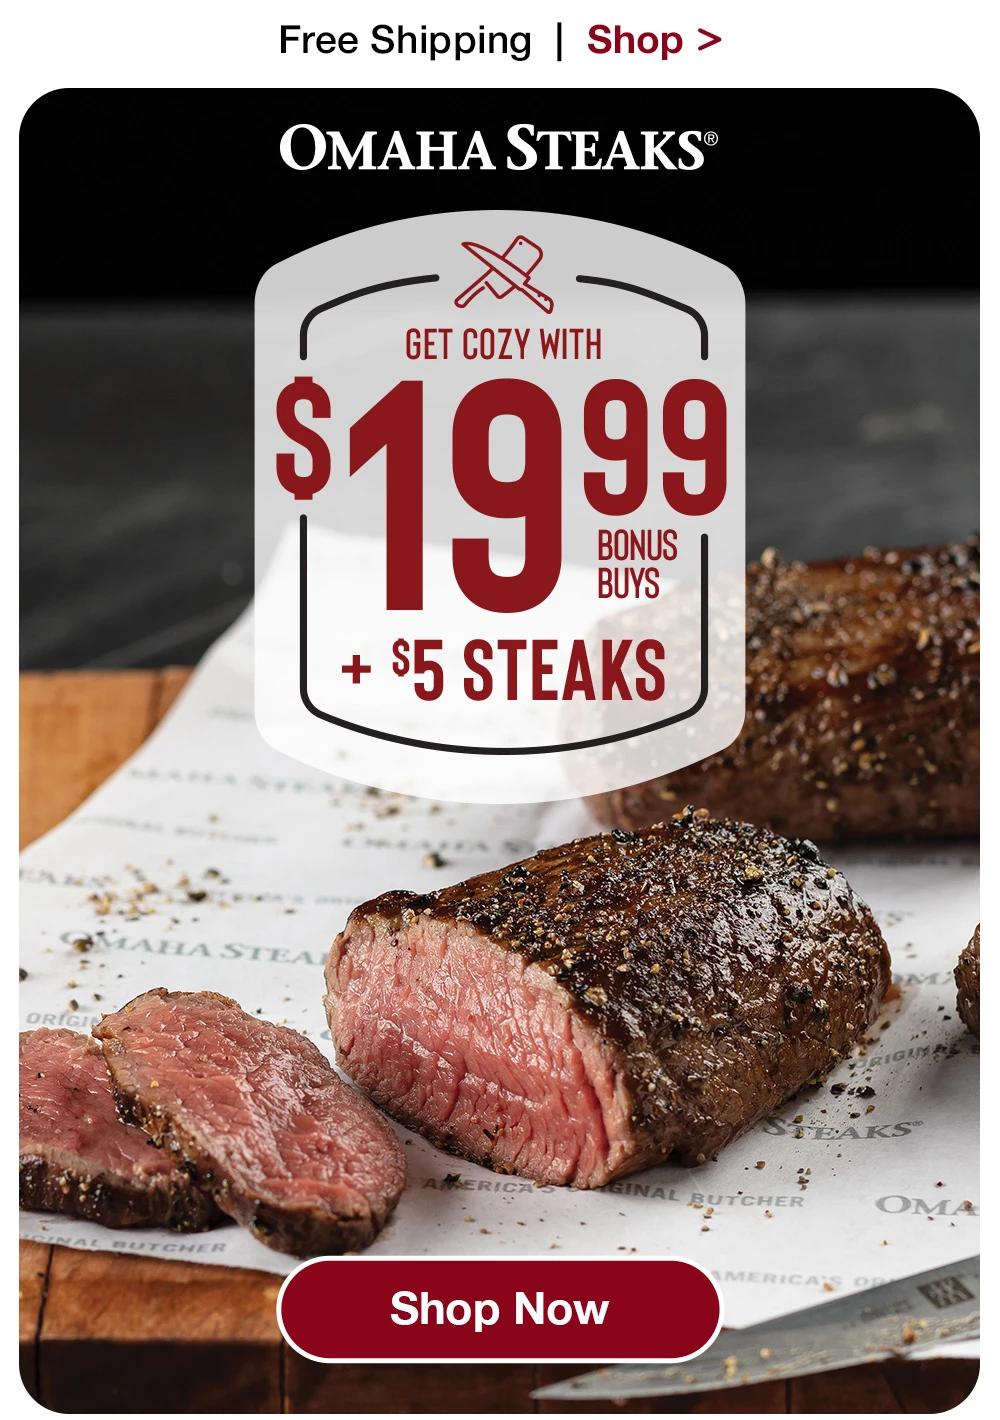 Omaha Steaks® Launches Steak Snacks in Retail Stores Nationwide